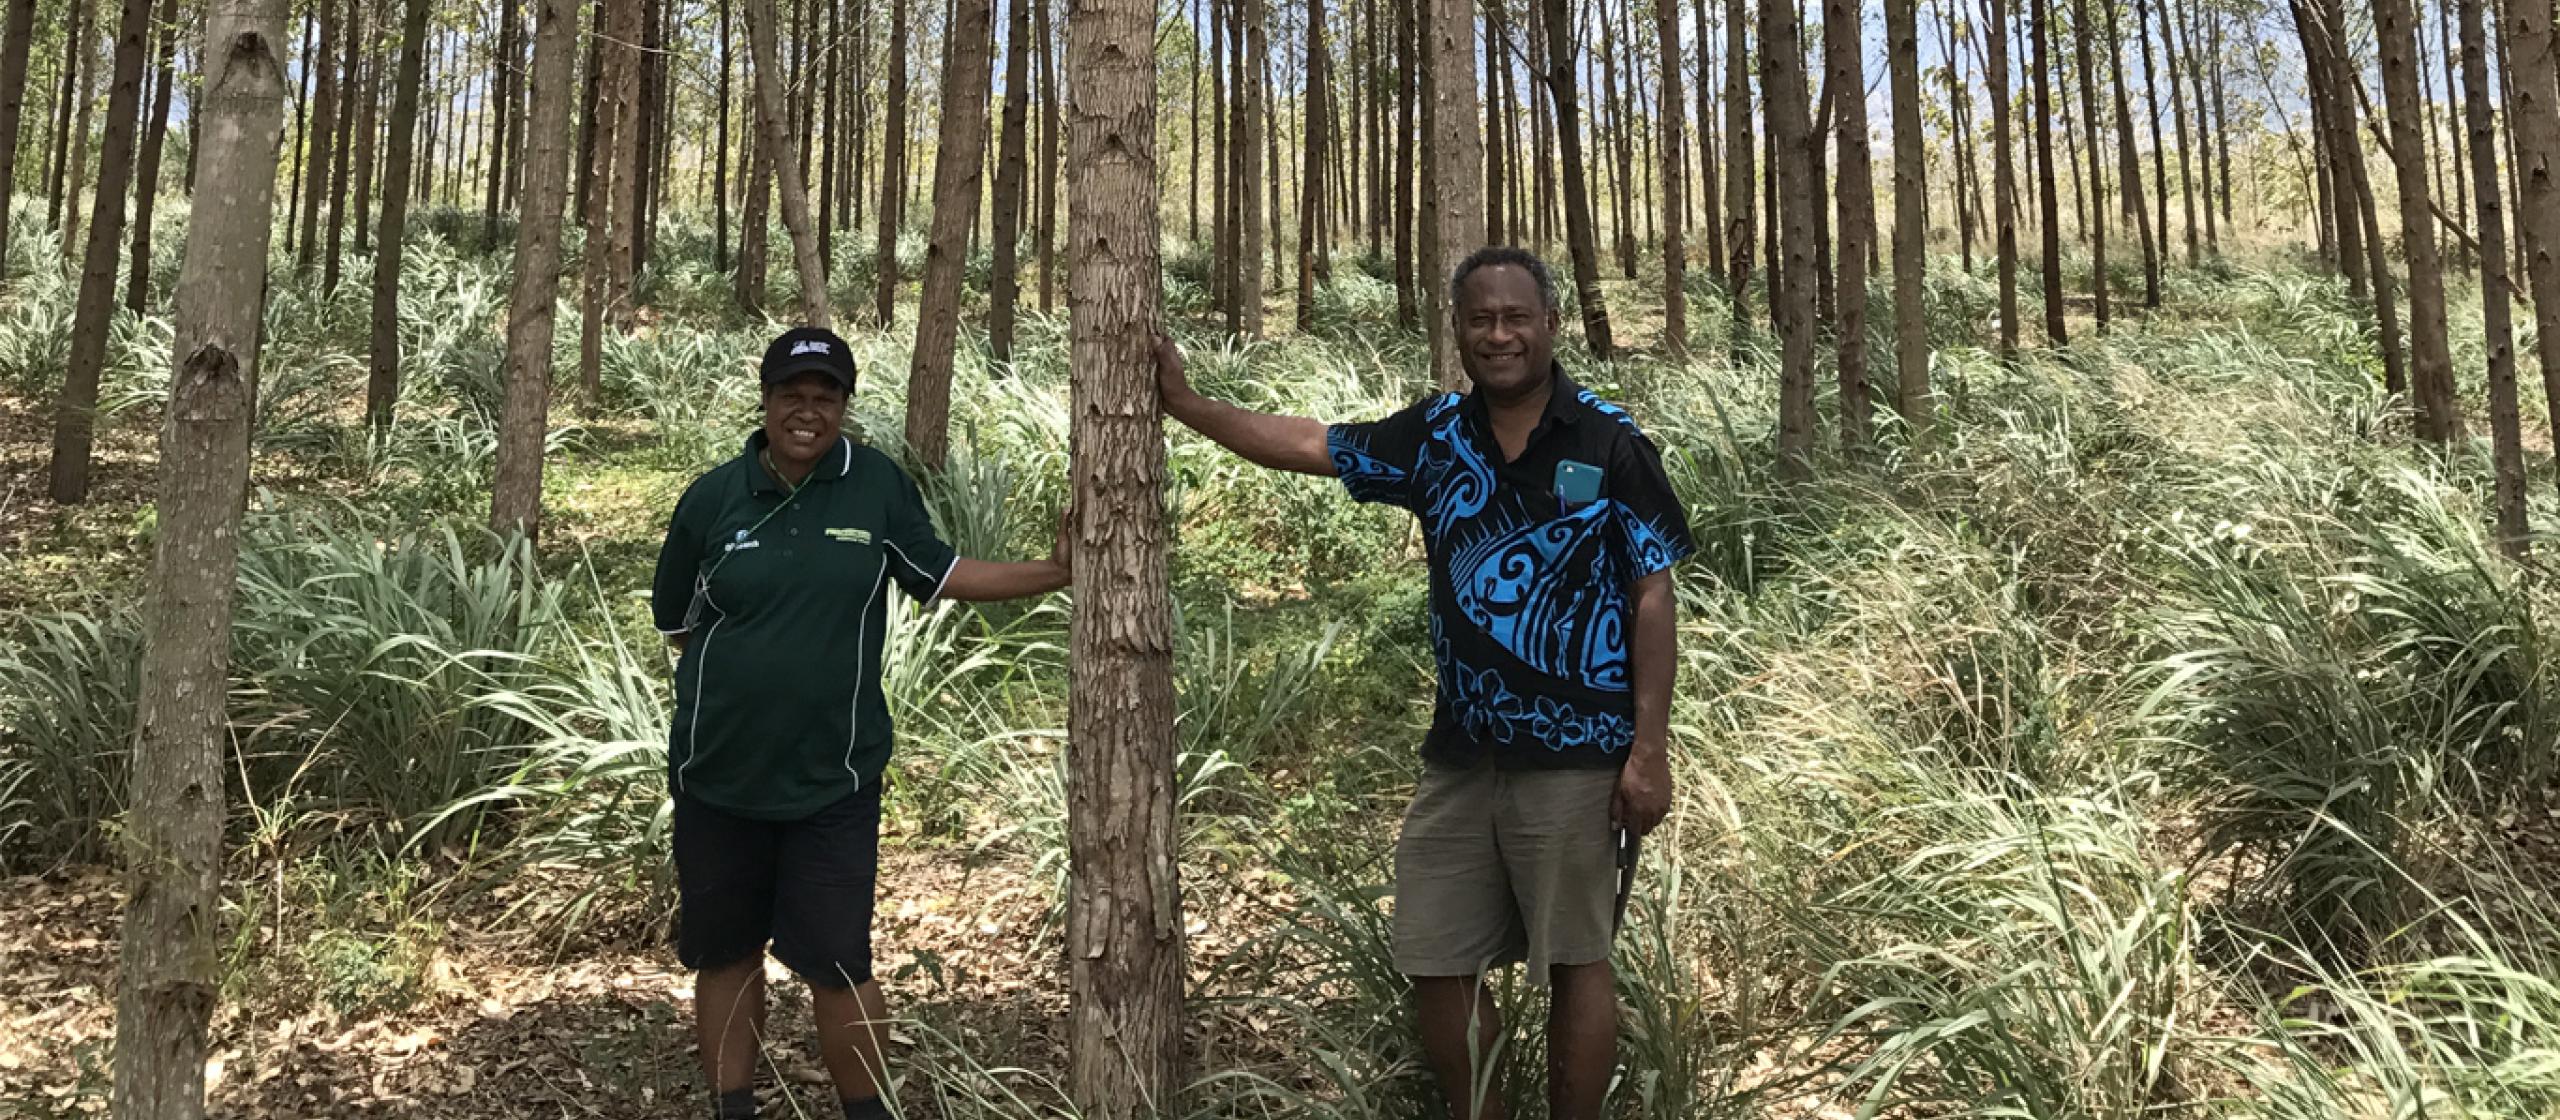 In Papua New Guinea, Gorethy Dipsen and Kulala Mulung both completed tertiary studies under the JAF scholarship program, learning valuable scientific skills that further assisted forestry projects in PNG.